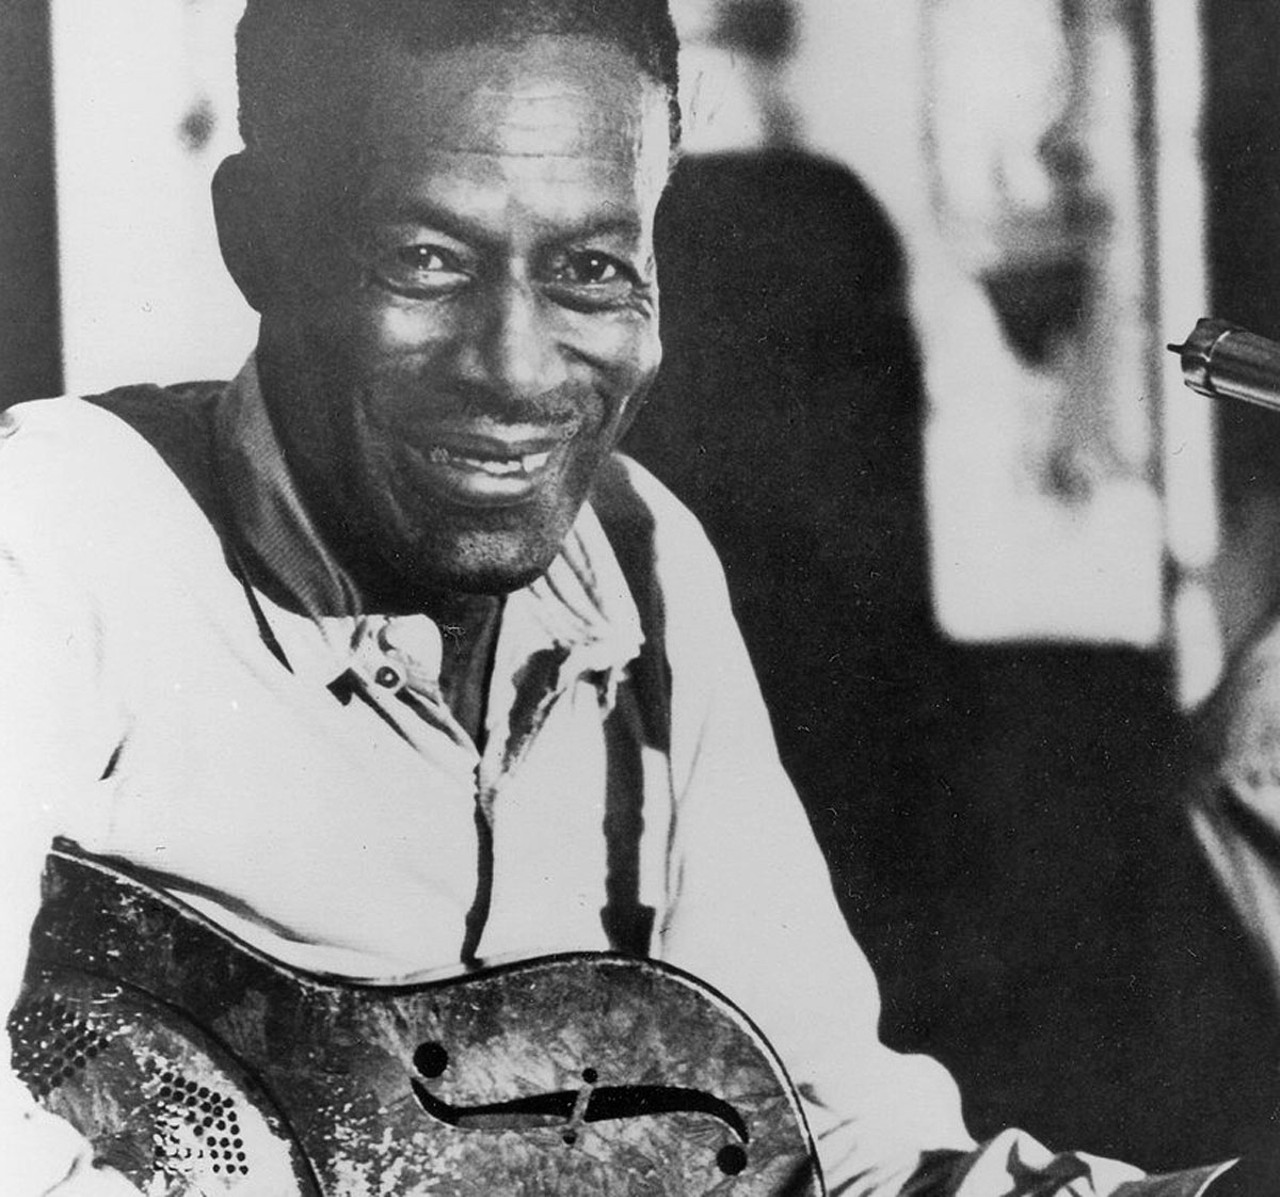 Son House  
Renowned for his slide guitar prowess, Edward James “Son” House Jr. transitioned from preaching in Mississippi to playing blues music at 25. Despite initial struggles, the blues revival of the 1960s revitalized his career. House retired in 1974 and spent his final years in Detroit, passing away in 1988 at age 86. He is buried at Mt. Hazel Cemetery, where members of the Detroit Blues Society raised money through benefit concerts to build a monument.